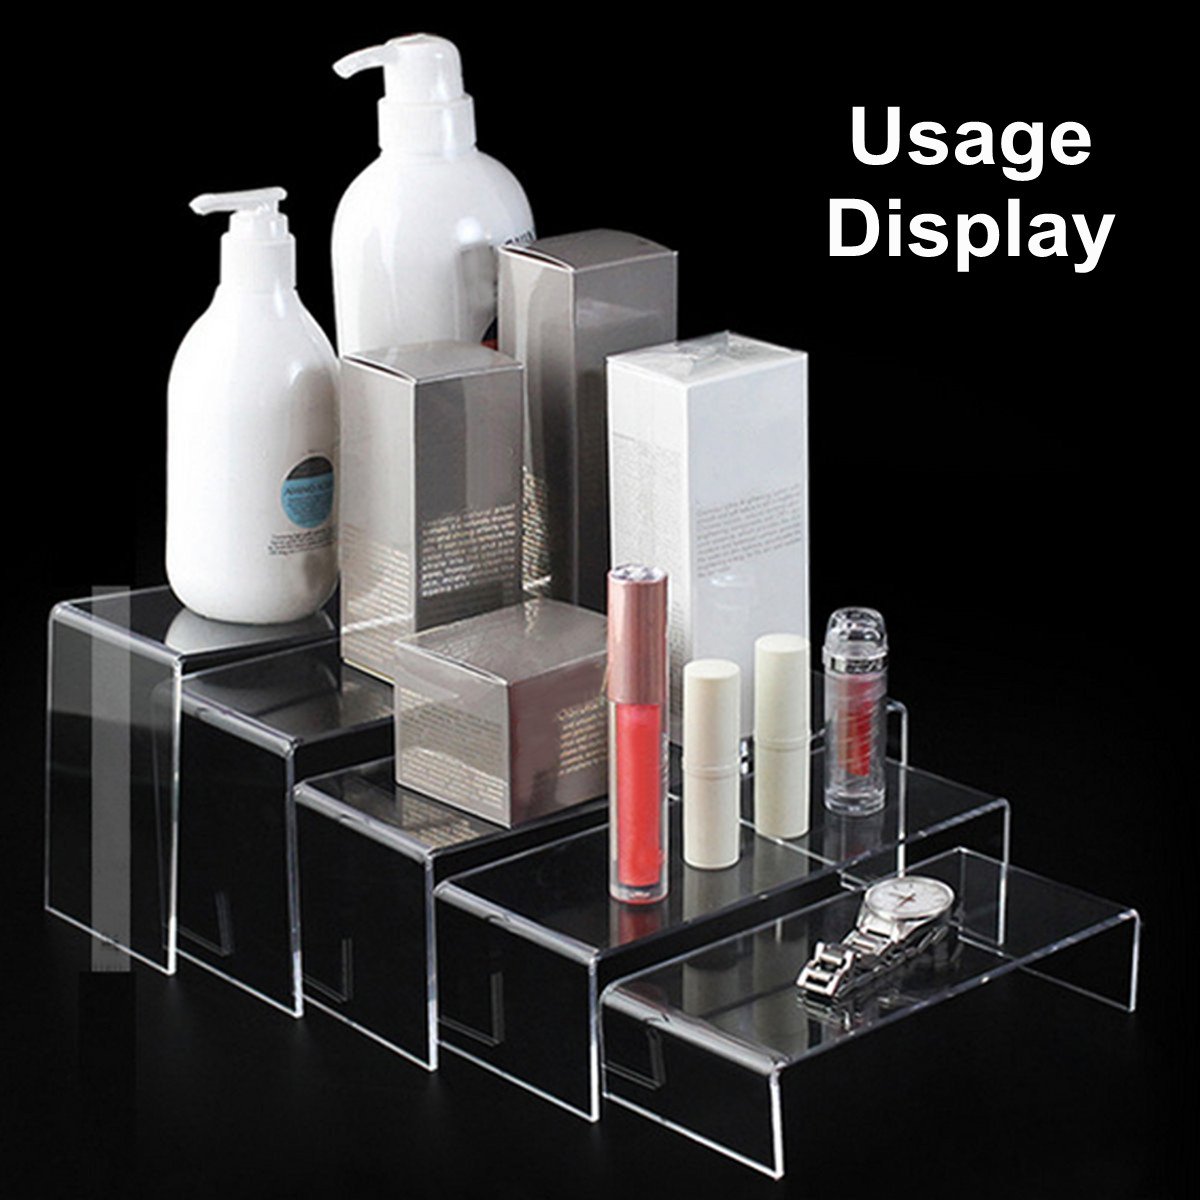 5Pcs-Clear-Acrylic-Perspex-Sturdy-Jewelry-Cupcake-Dessert-Display-Riser-Stand-Showcase-Decorations-1382269